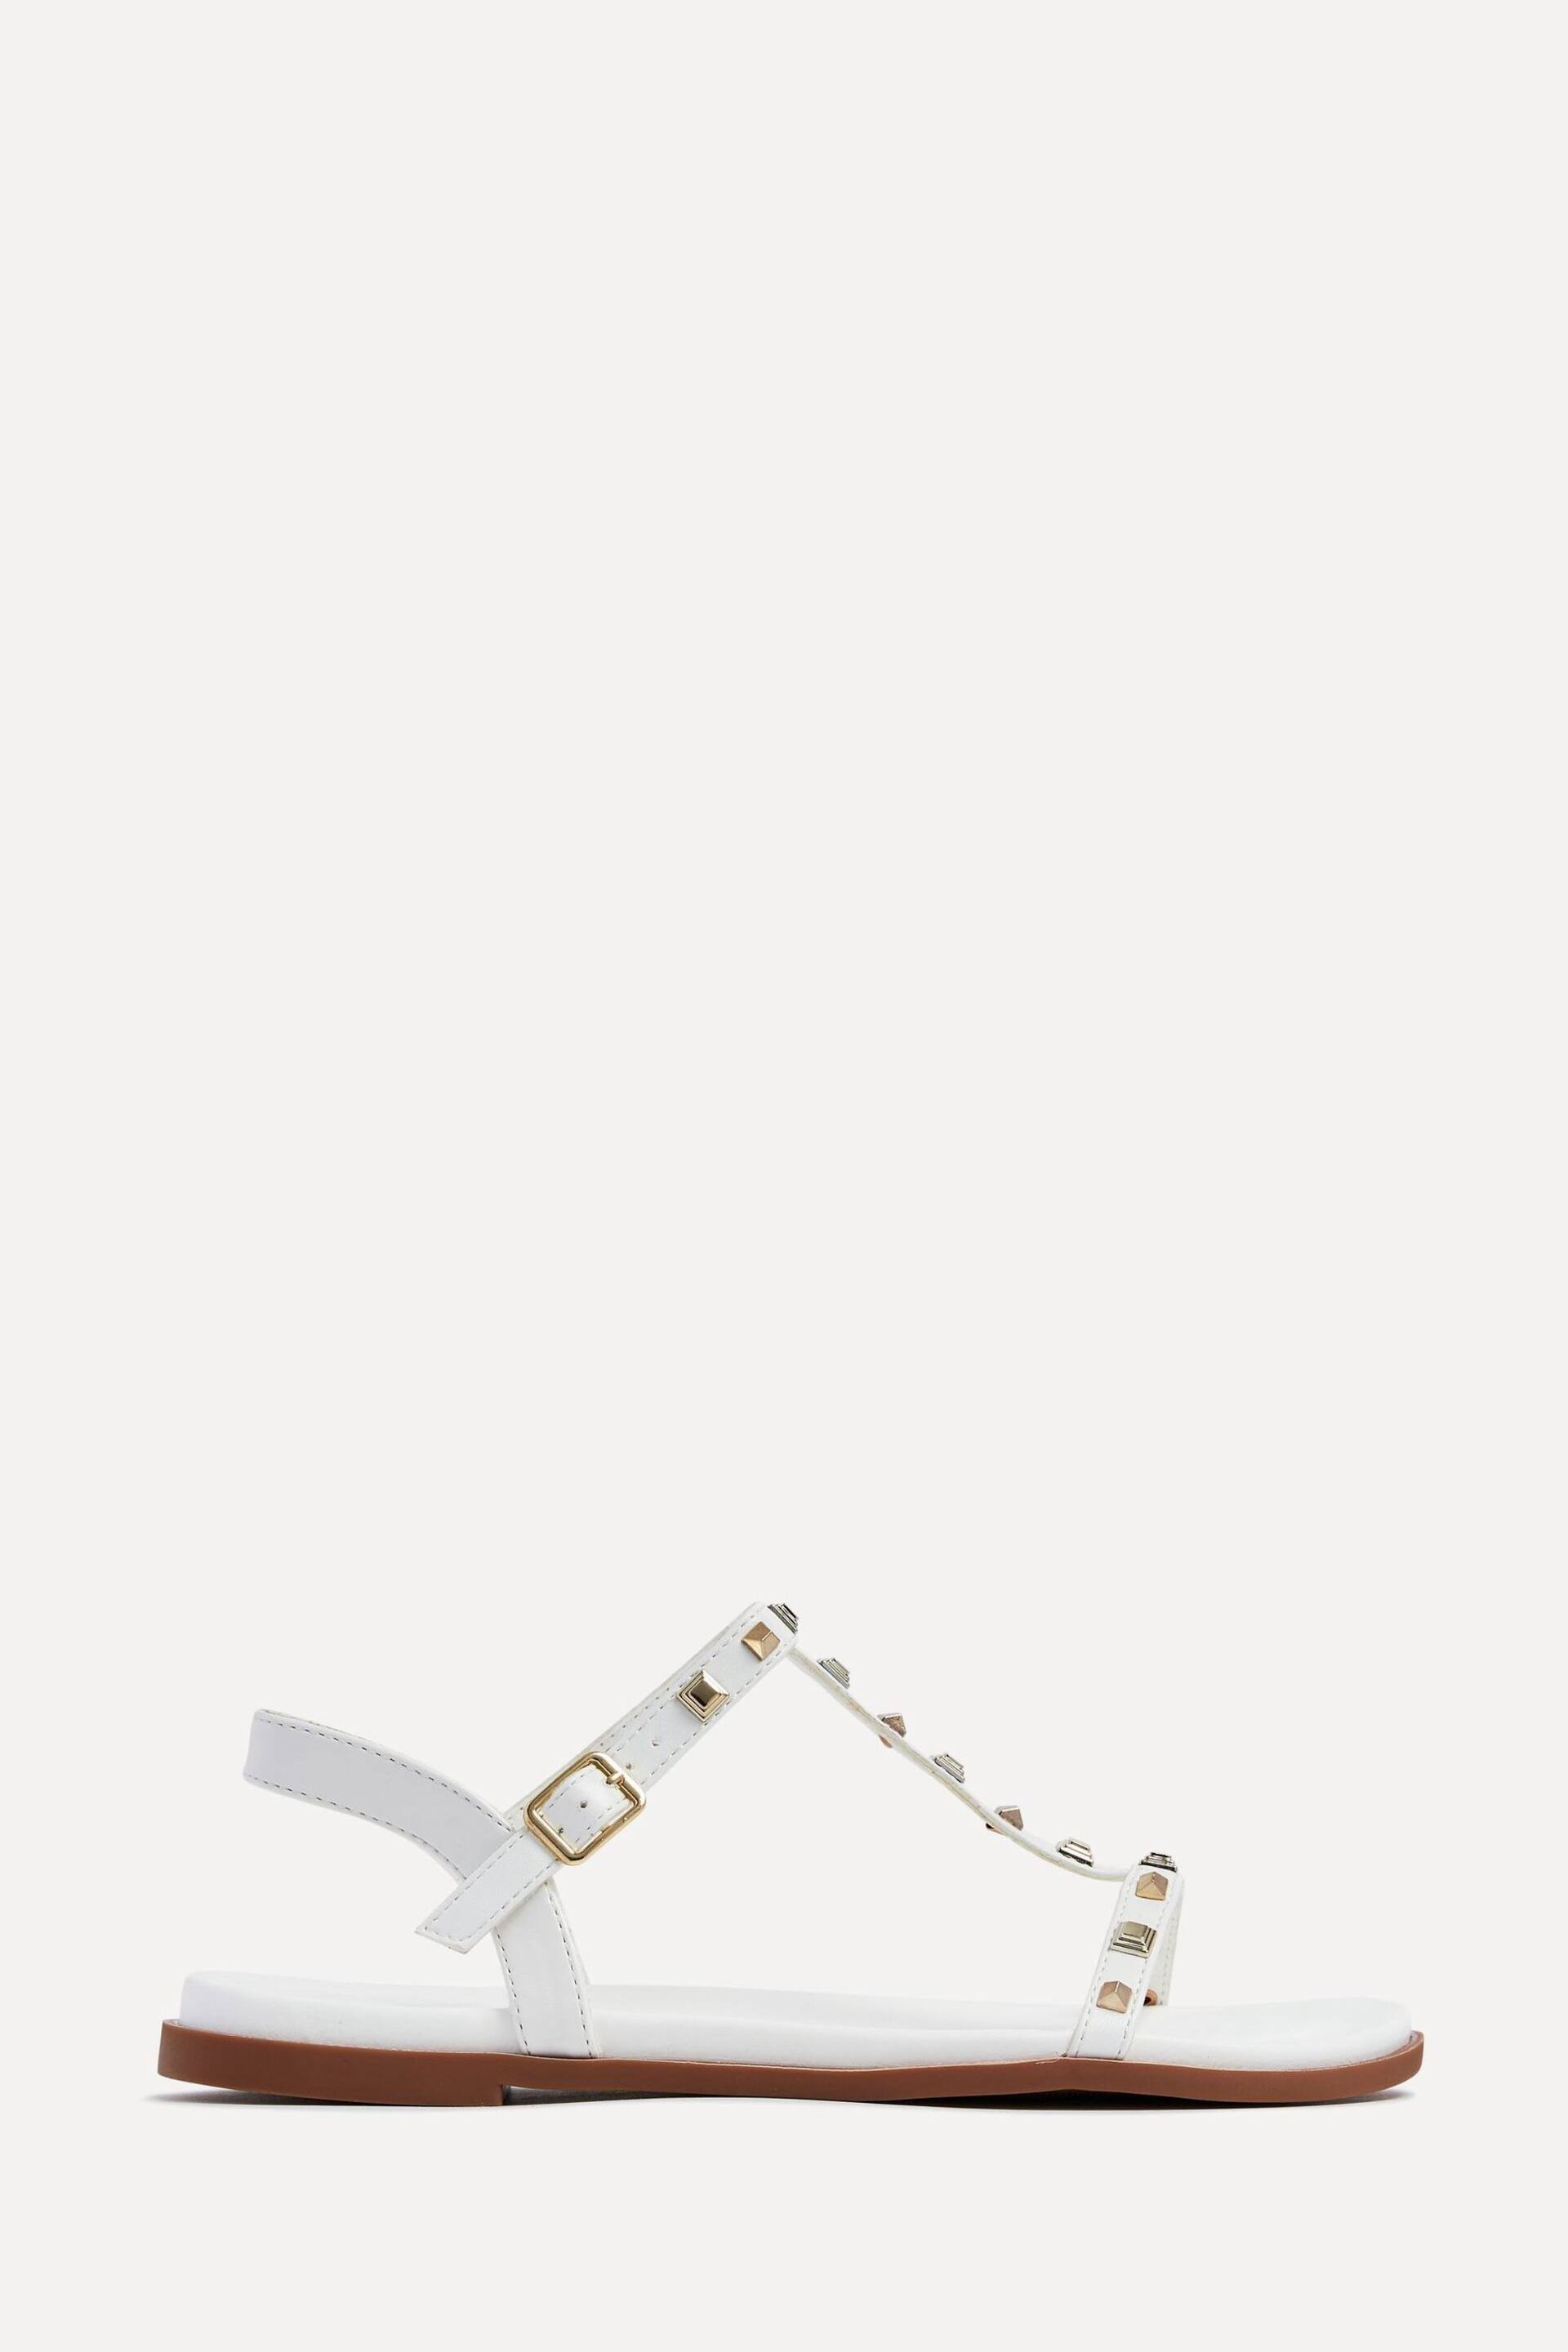 Linzi White Bliss T-Post Flat Sandals With Stud Embellishment - Image 2 of 5